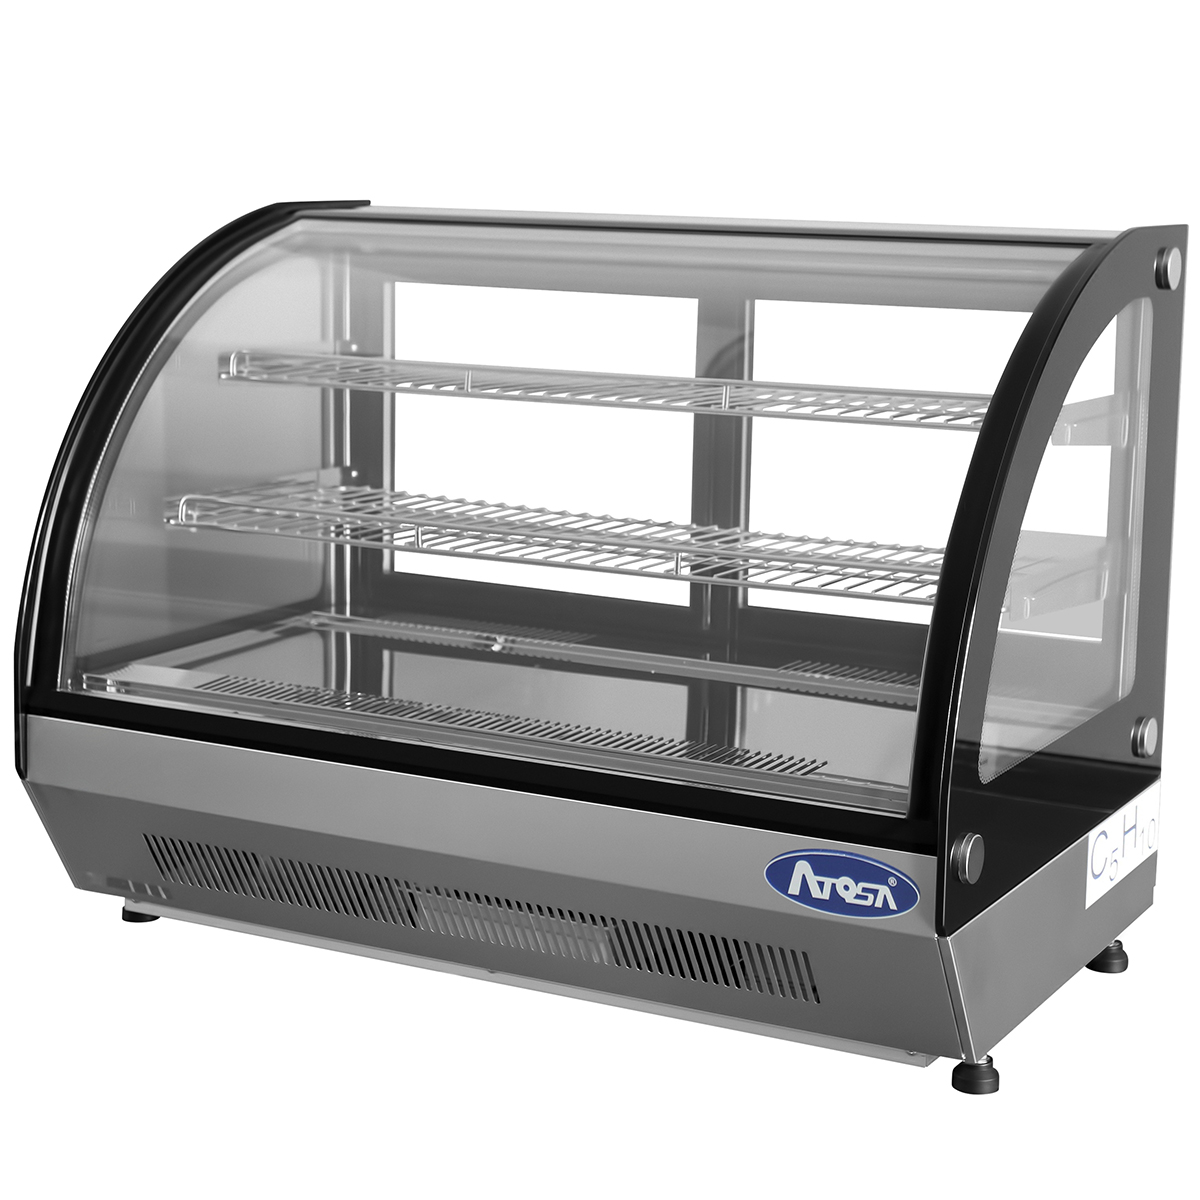 Atosa CRDC-46 Refrigerated Countertop Display Case, 4.6 cu.ft. - 35-2/5"W x 22-1/10"D x 26-2/5"H image 2